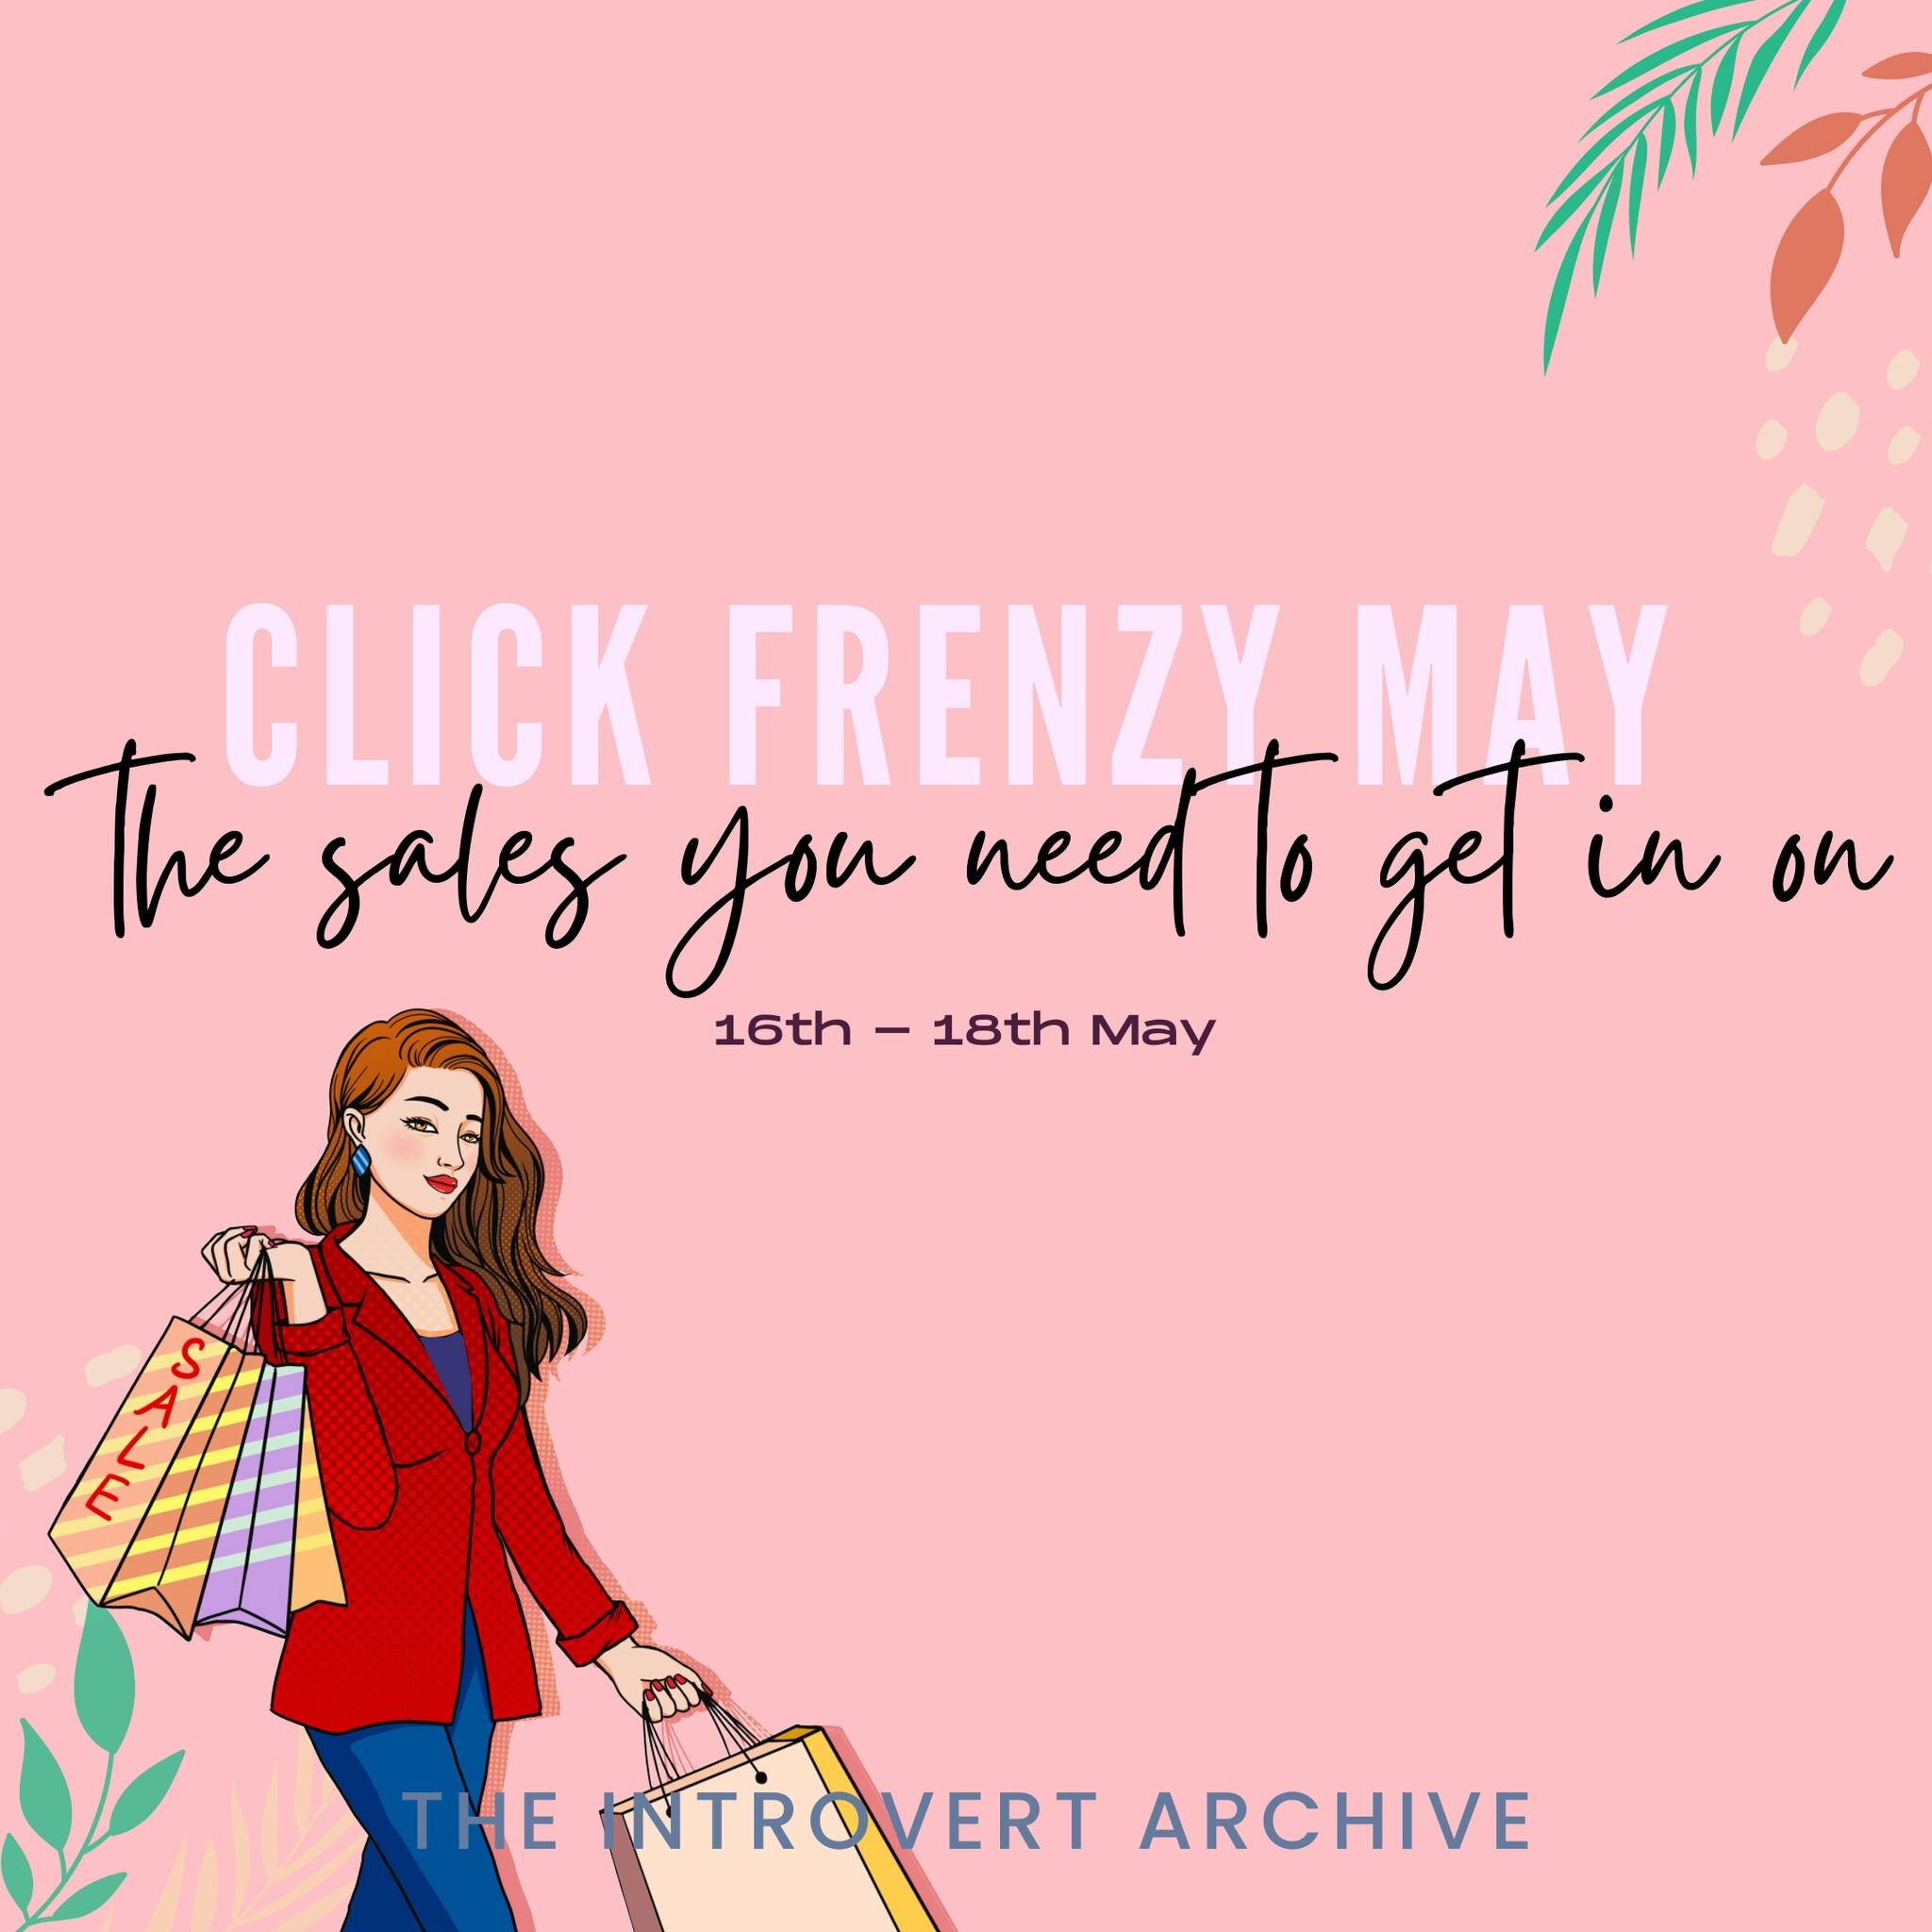 Your ultimate guide to Click Frenzy May 2023 is HERE! Get shopping for those discounts ✨

#theintrovertarchive #clickfrenzy #clickfrenzy2023